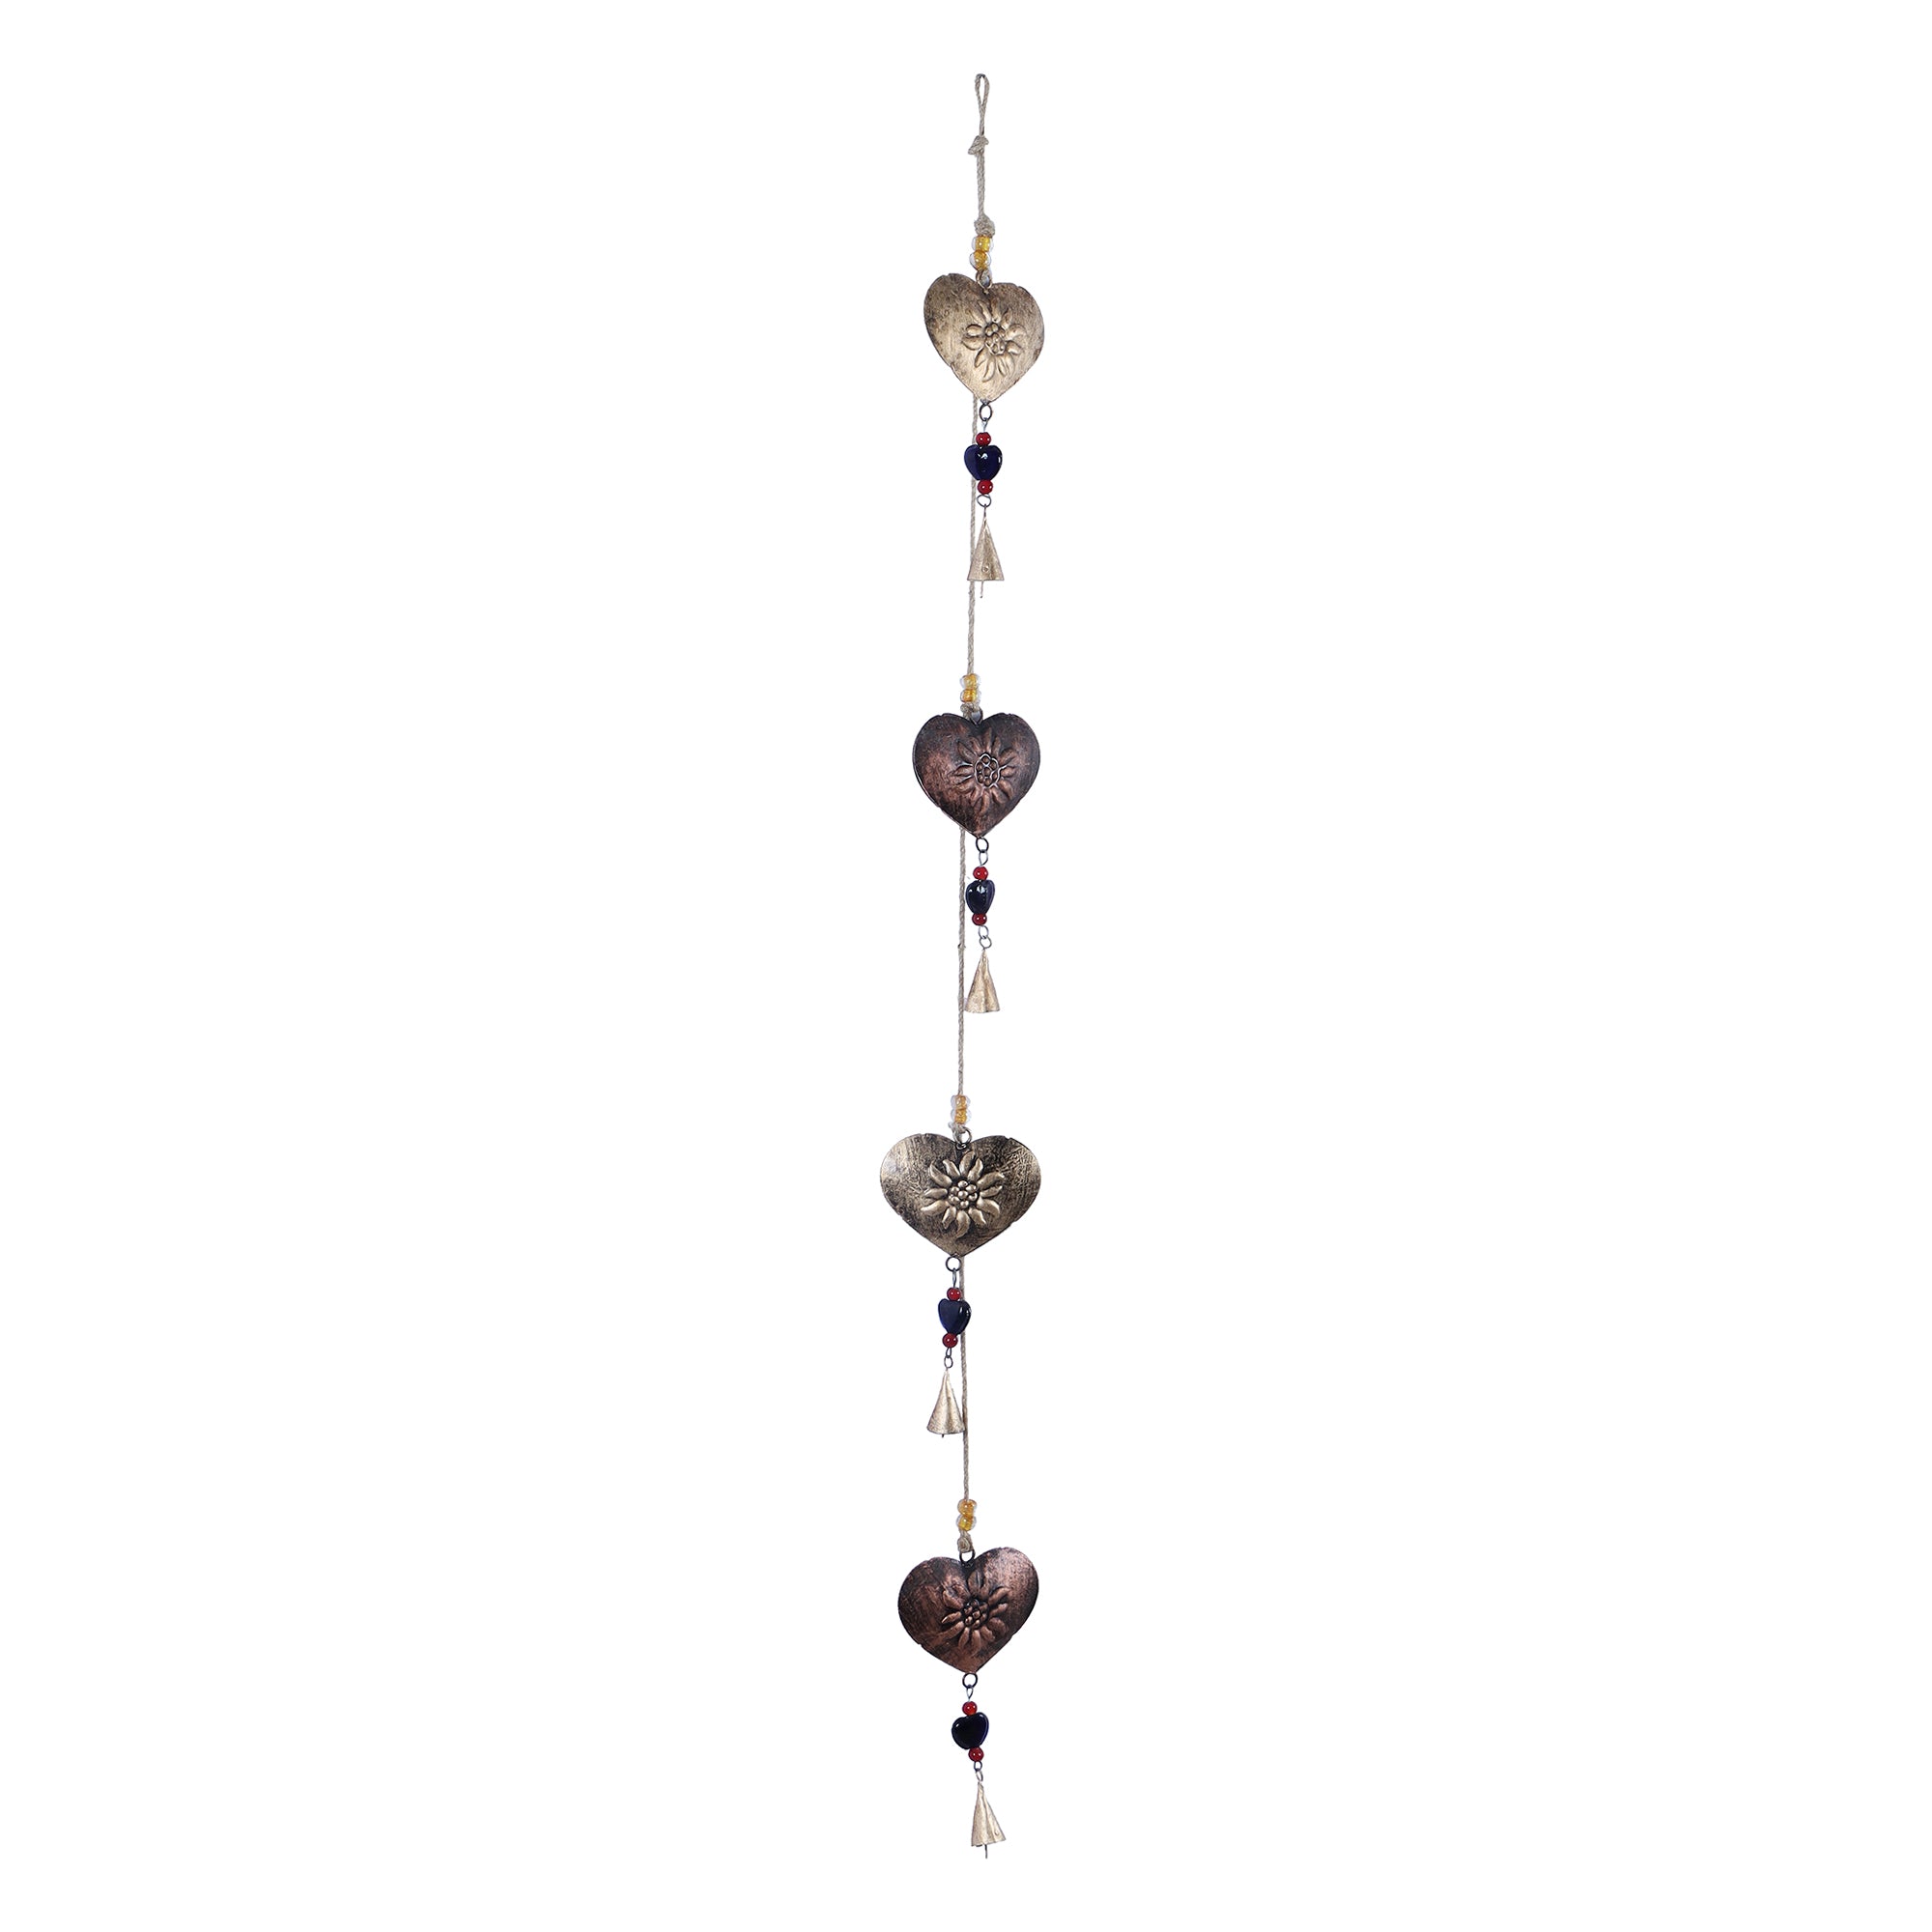 Handcarved Hearts Wind Chime